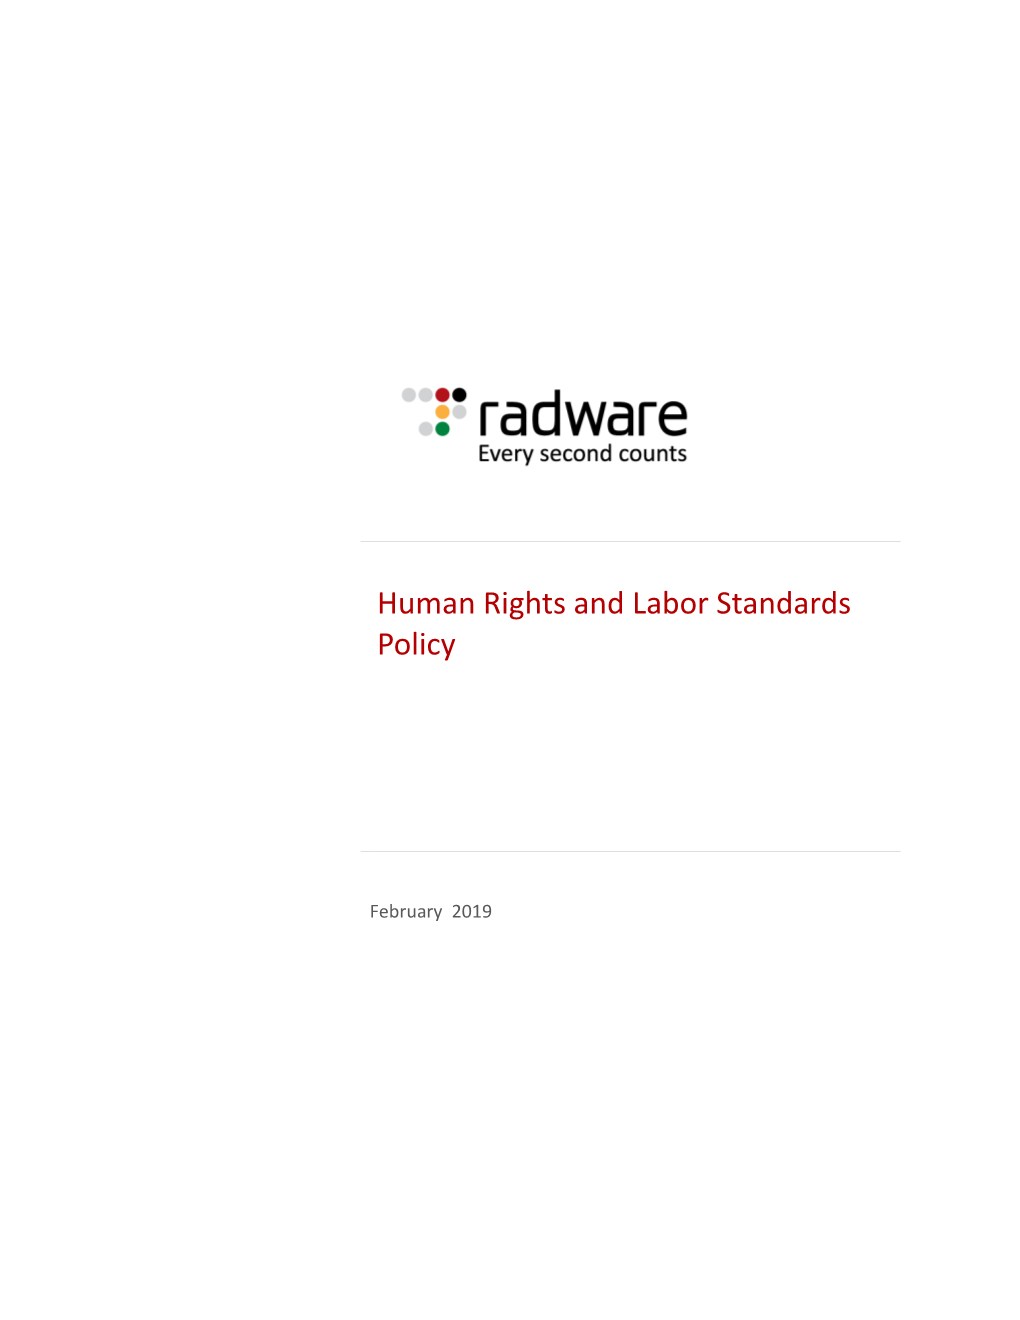 Human Rights and Labor Standards Policy